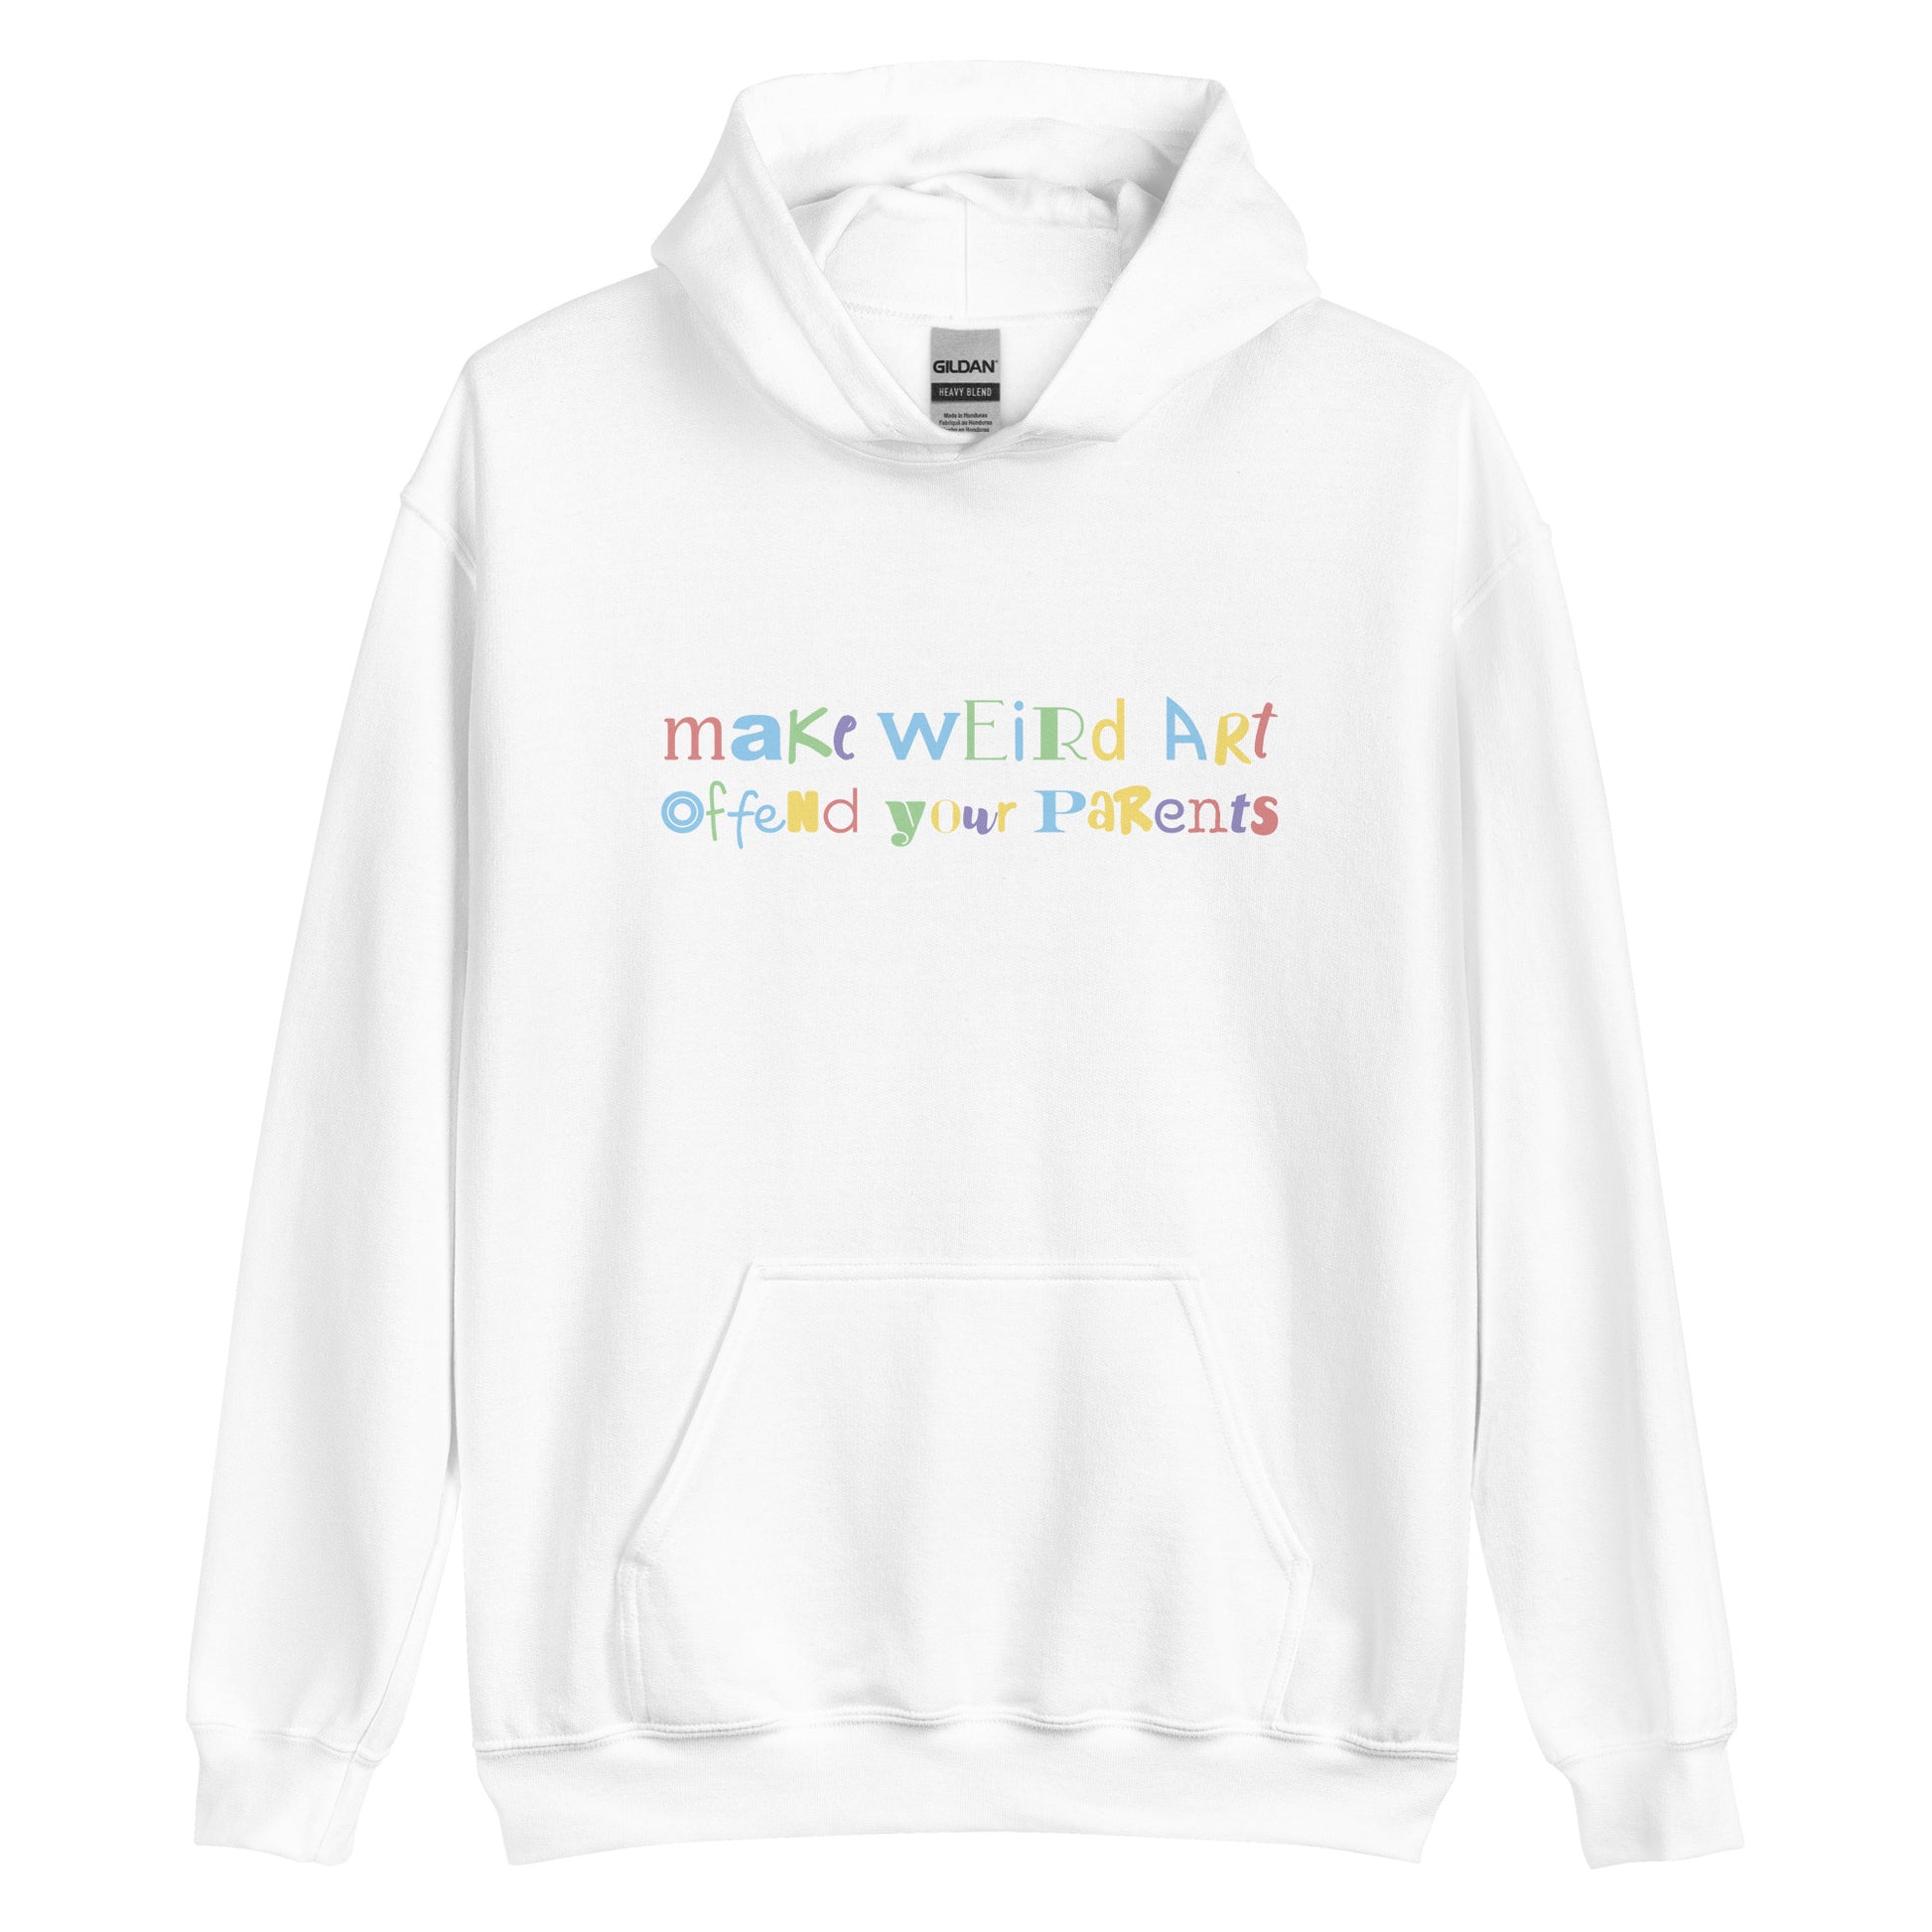 A white hooded sweatshirt featuring text that reads "make weird art, offend your parents" in a mix of different font styles and colors